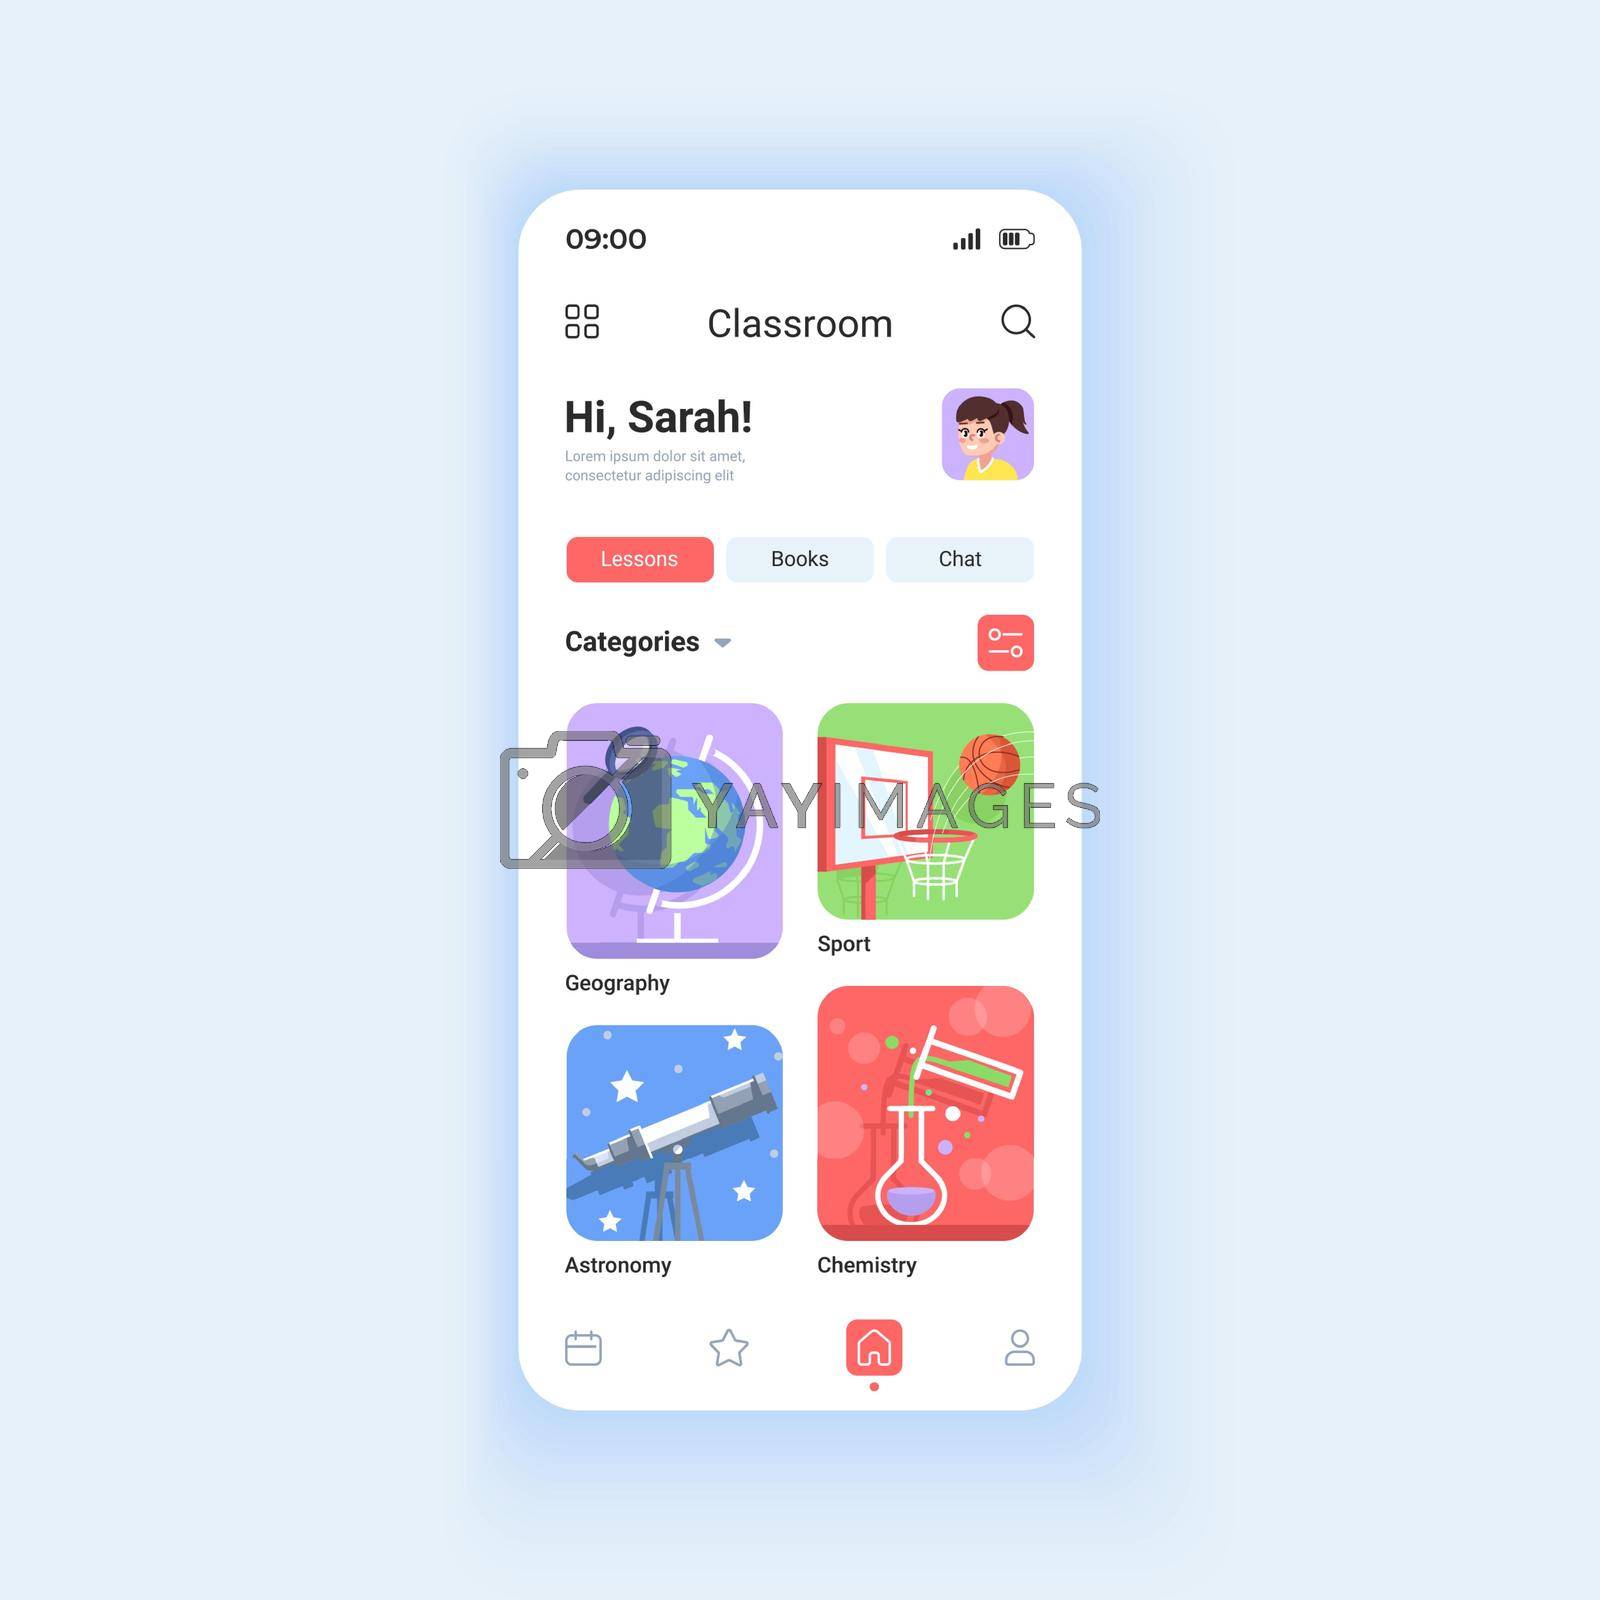 Online education daytime mode smartphone interface vector template. School lessons. Mobile app page design layout. Distance learning service screen. Flat UI for application. Phone display